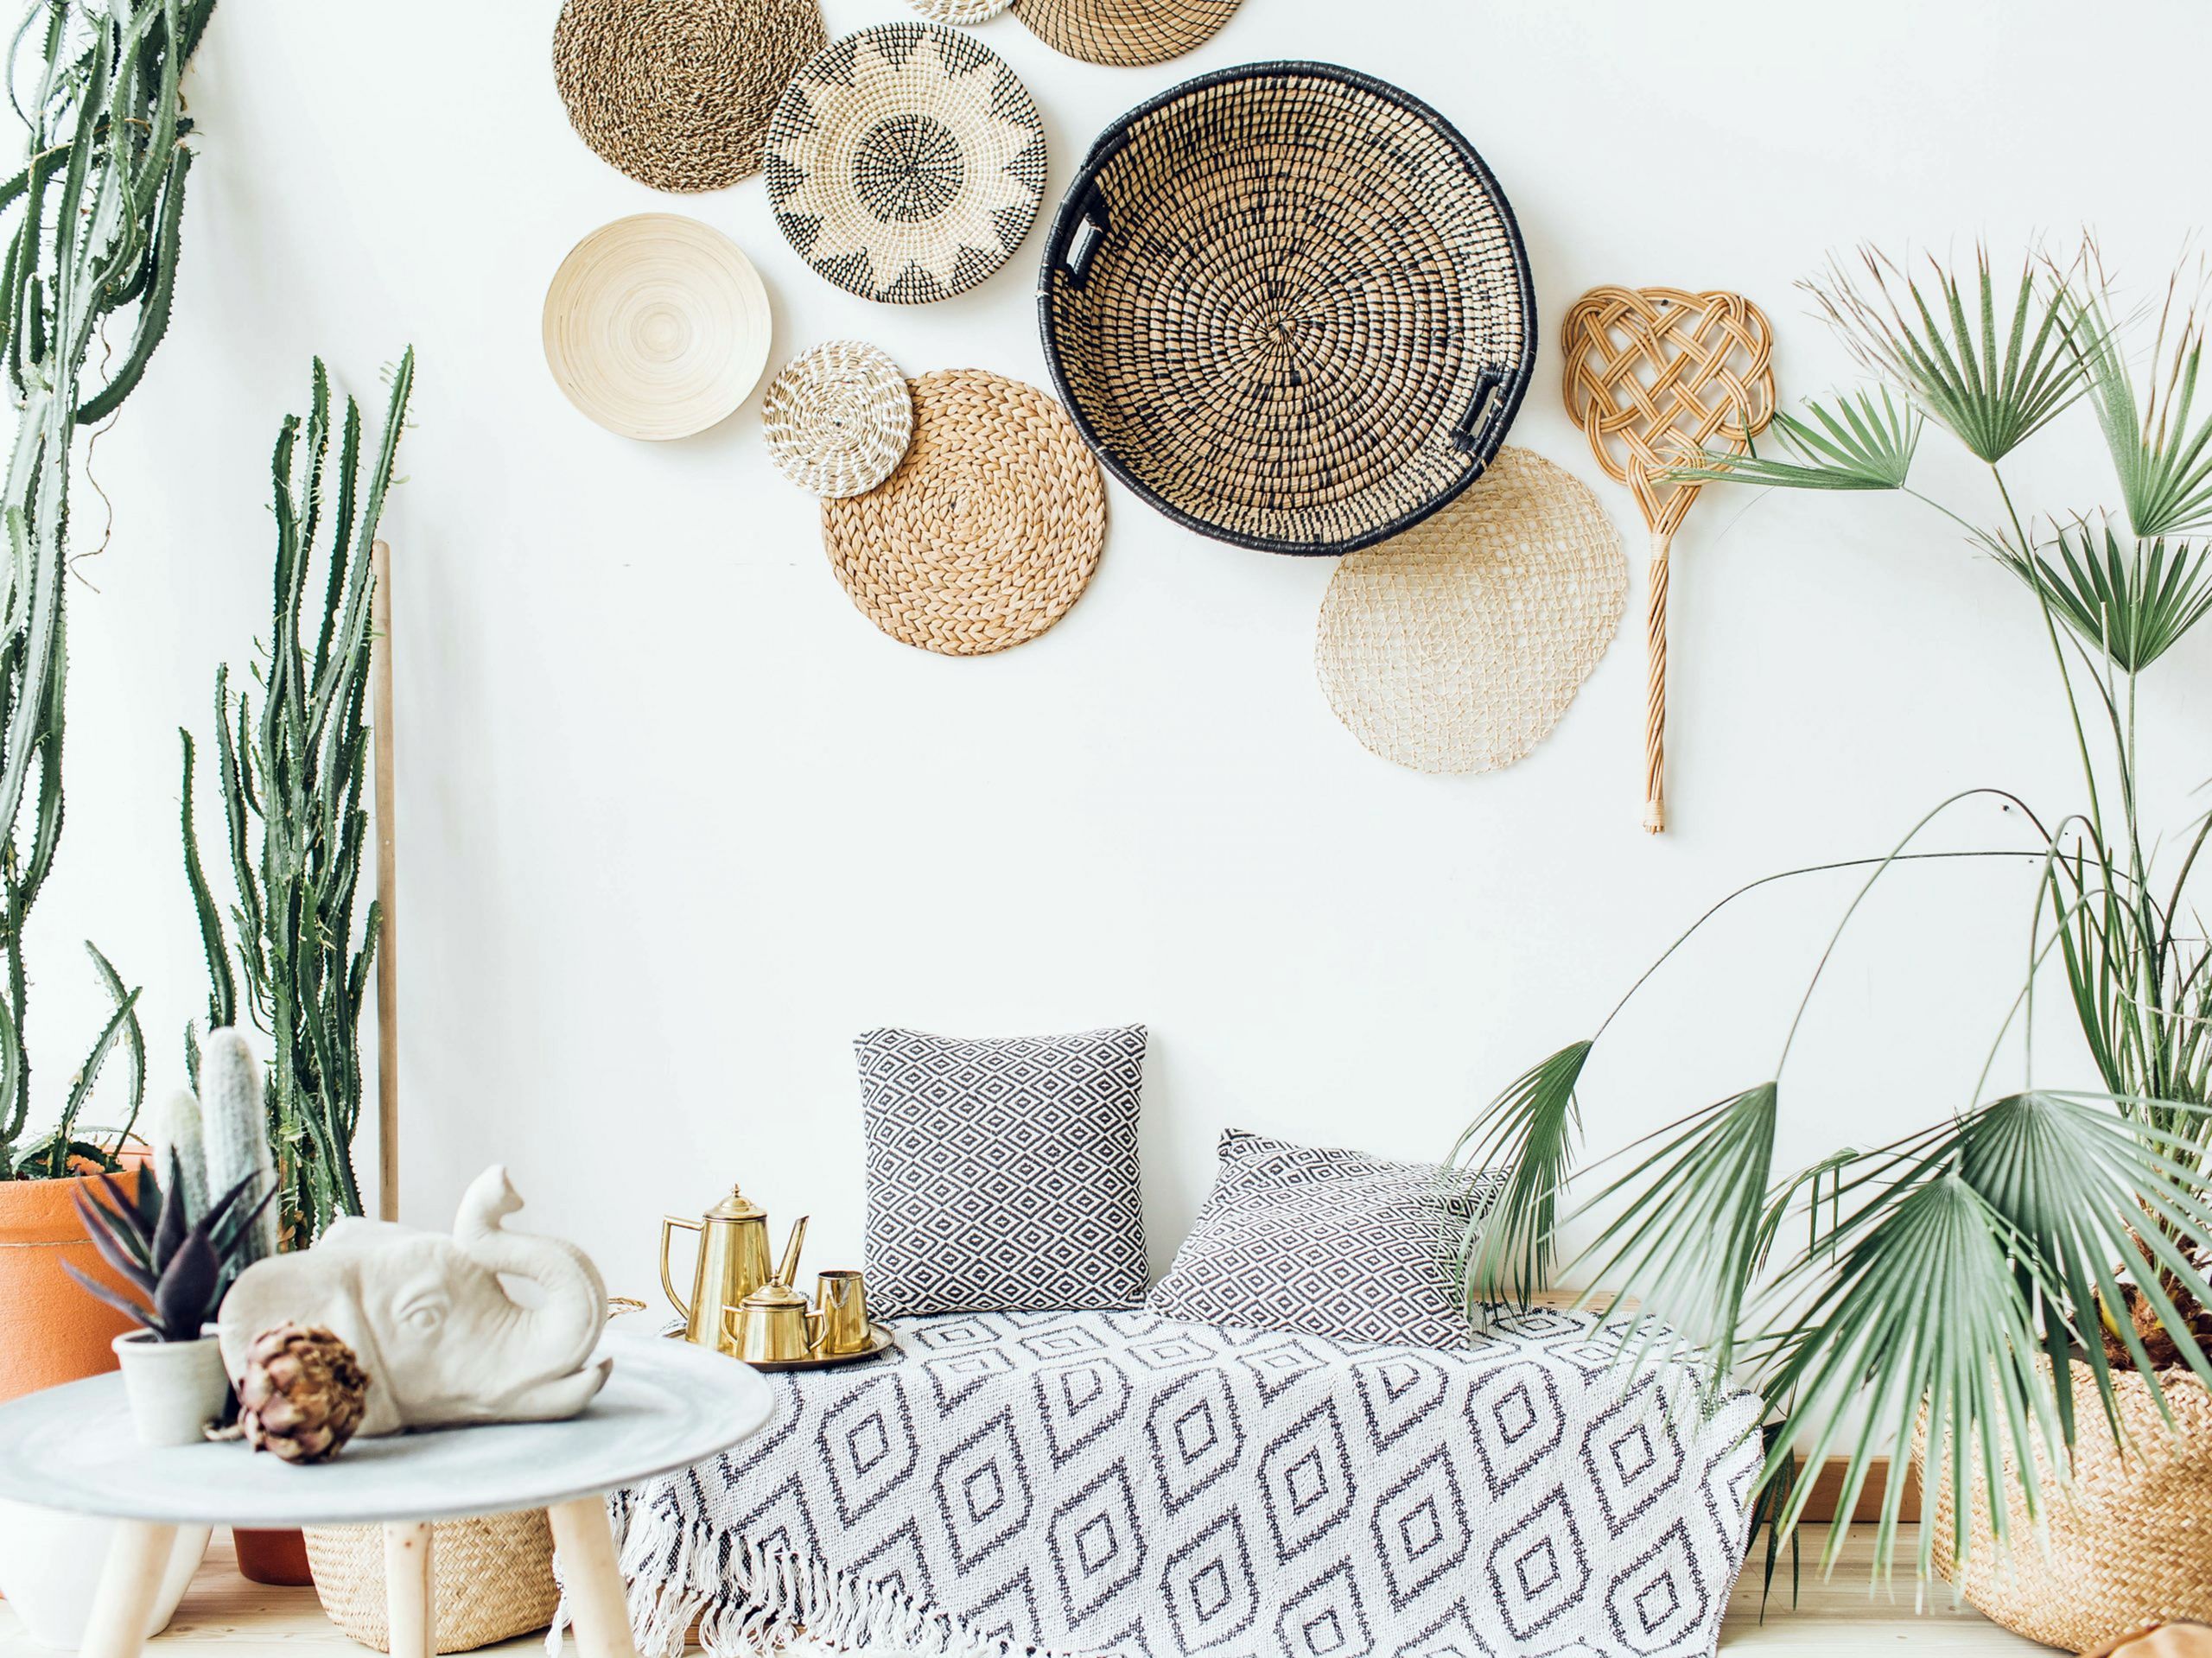 Home Decor From Sisalandseagrass